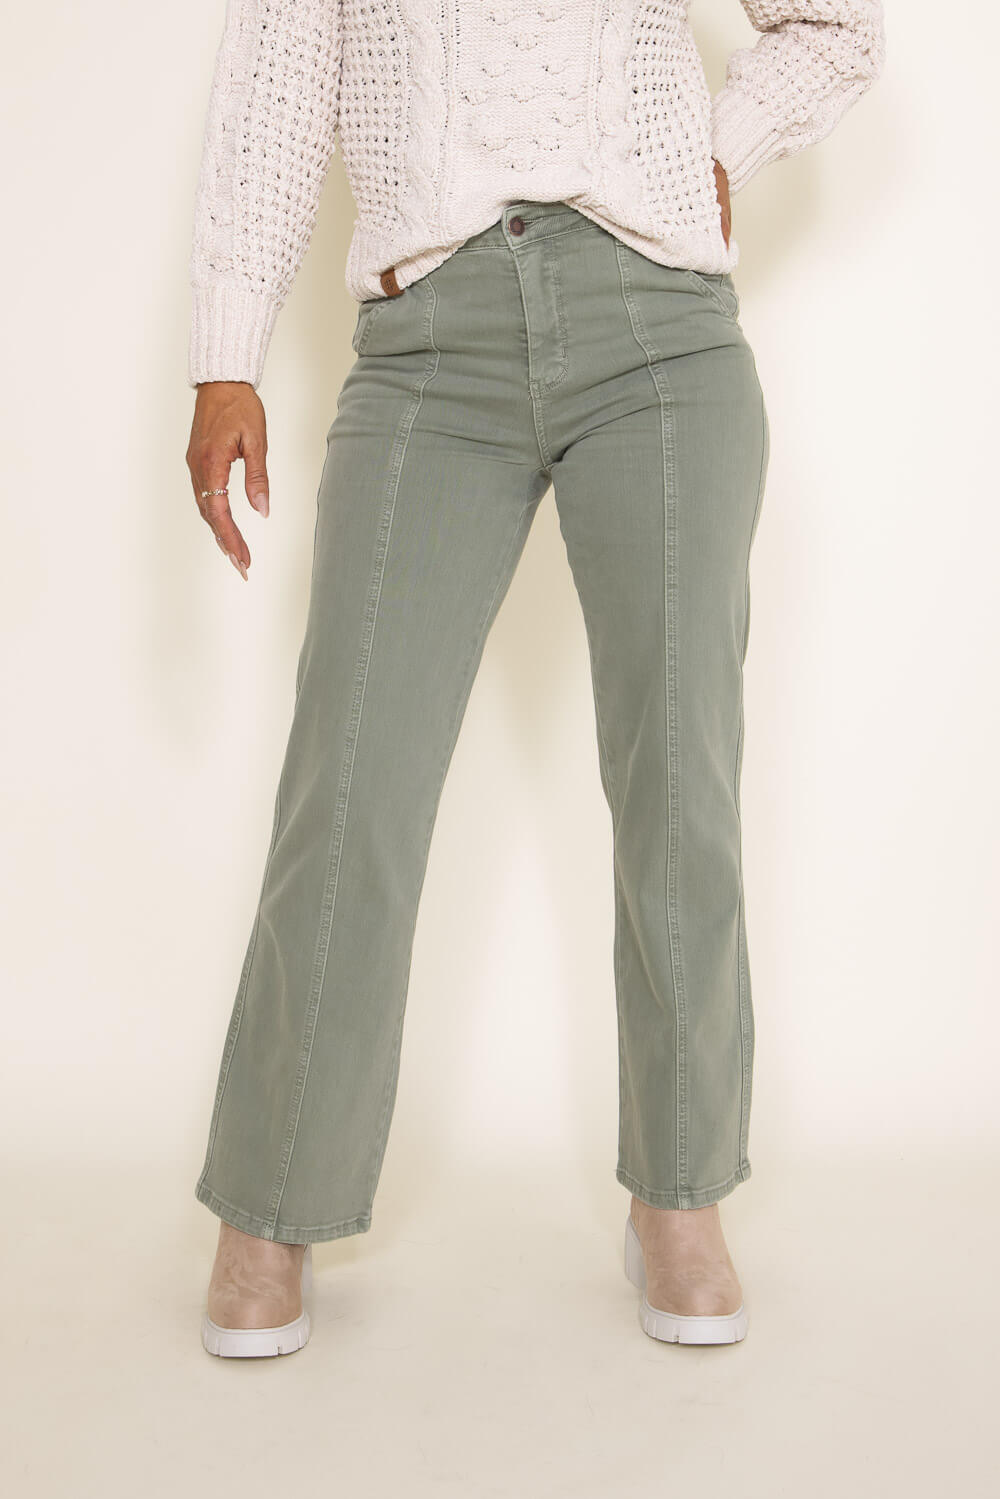 https://www.gliks.com/cdn/shop/files/001-Judy-Blue-High-Rise-Dyed-Front-Seam-Straight-Jeans-for-Women-in-Sage-88688-C-SAGE.jpg?v=1692886225